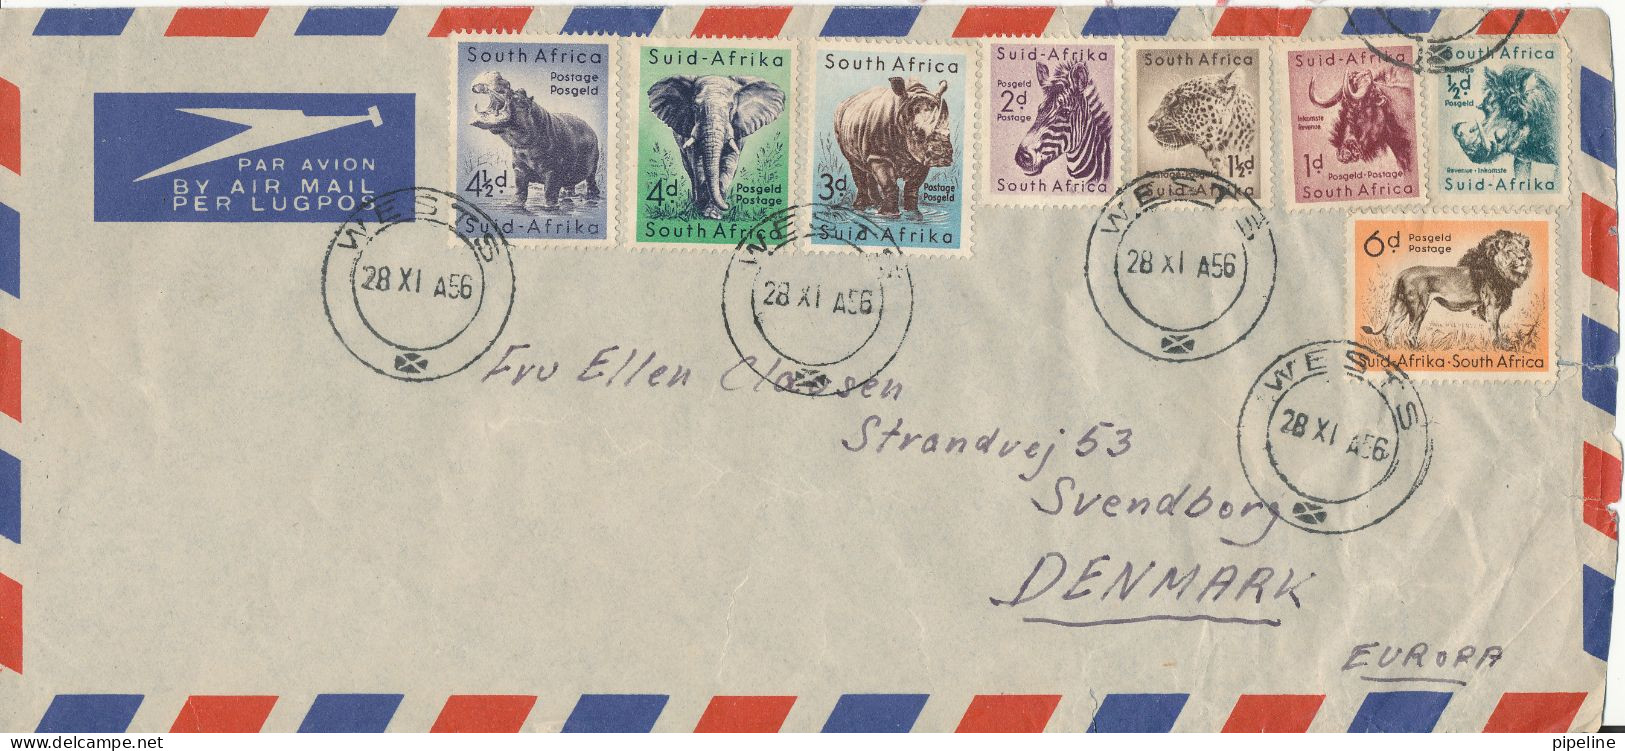 South Africa -Suid Afrika Air Mail Cover Sent To Denmark Wests 28-11-1956 With A Lot Of Topical Stamps - Aéreo